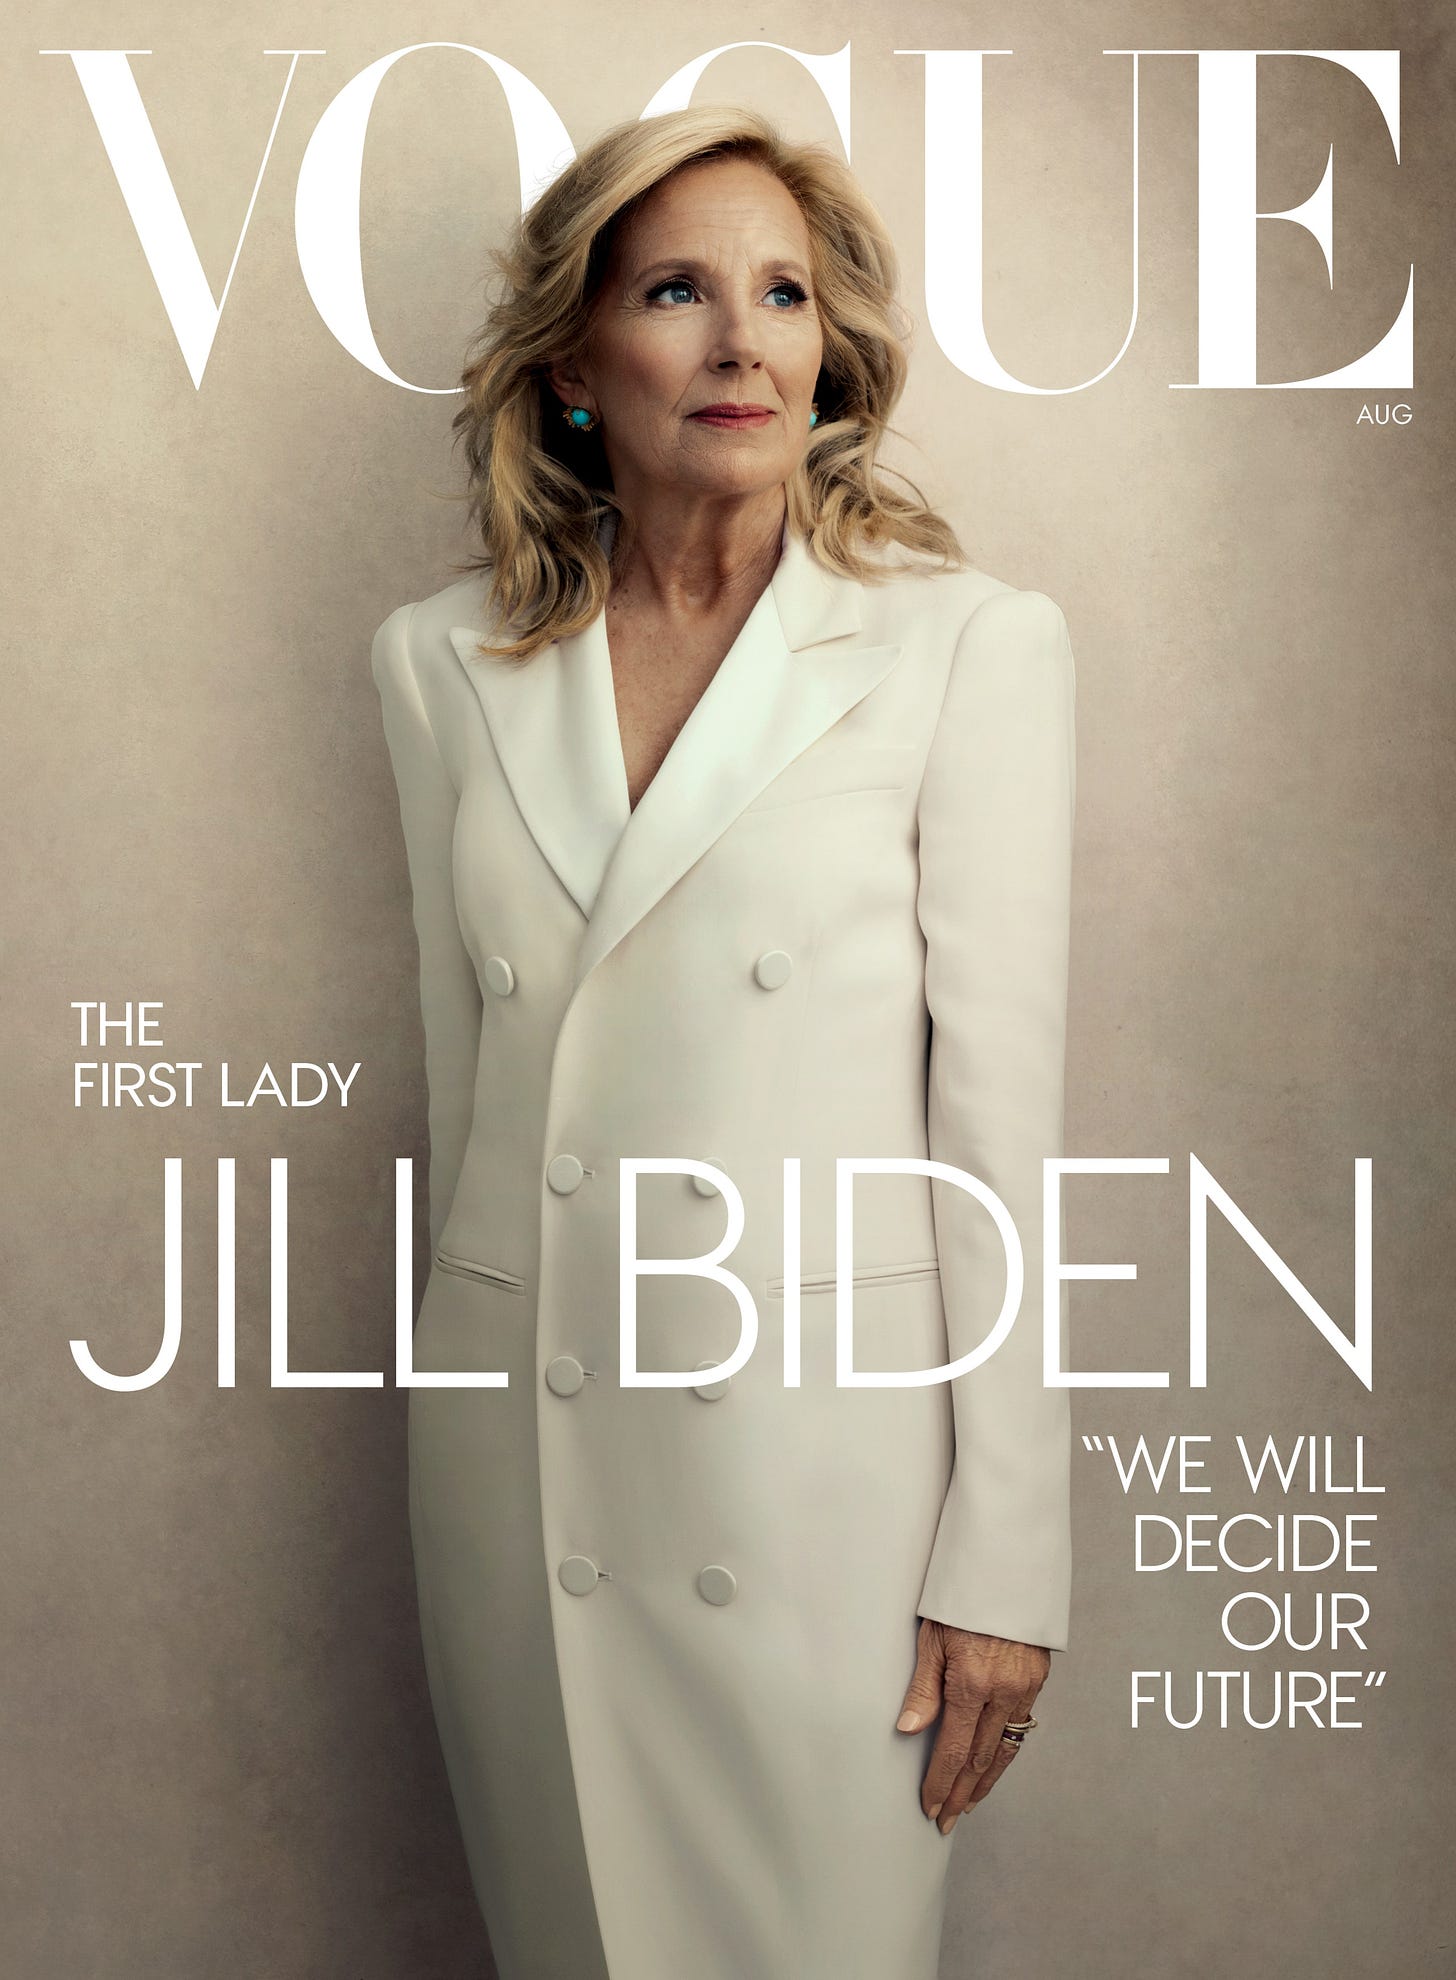 Image may contain Jill Biden Publication Clothing Formal Wear Suit Coat and Magazine